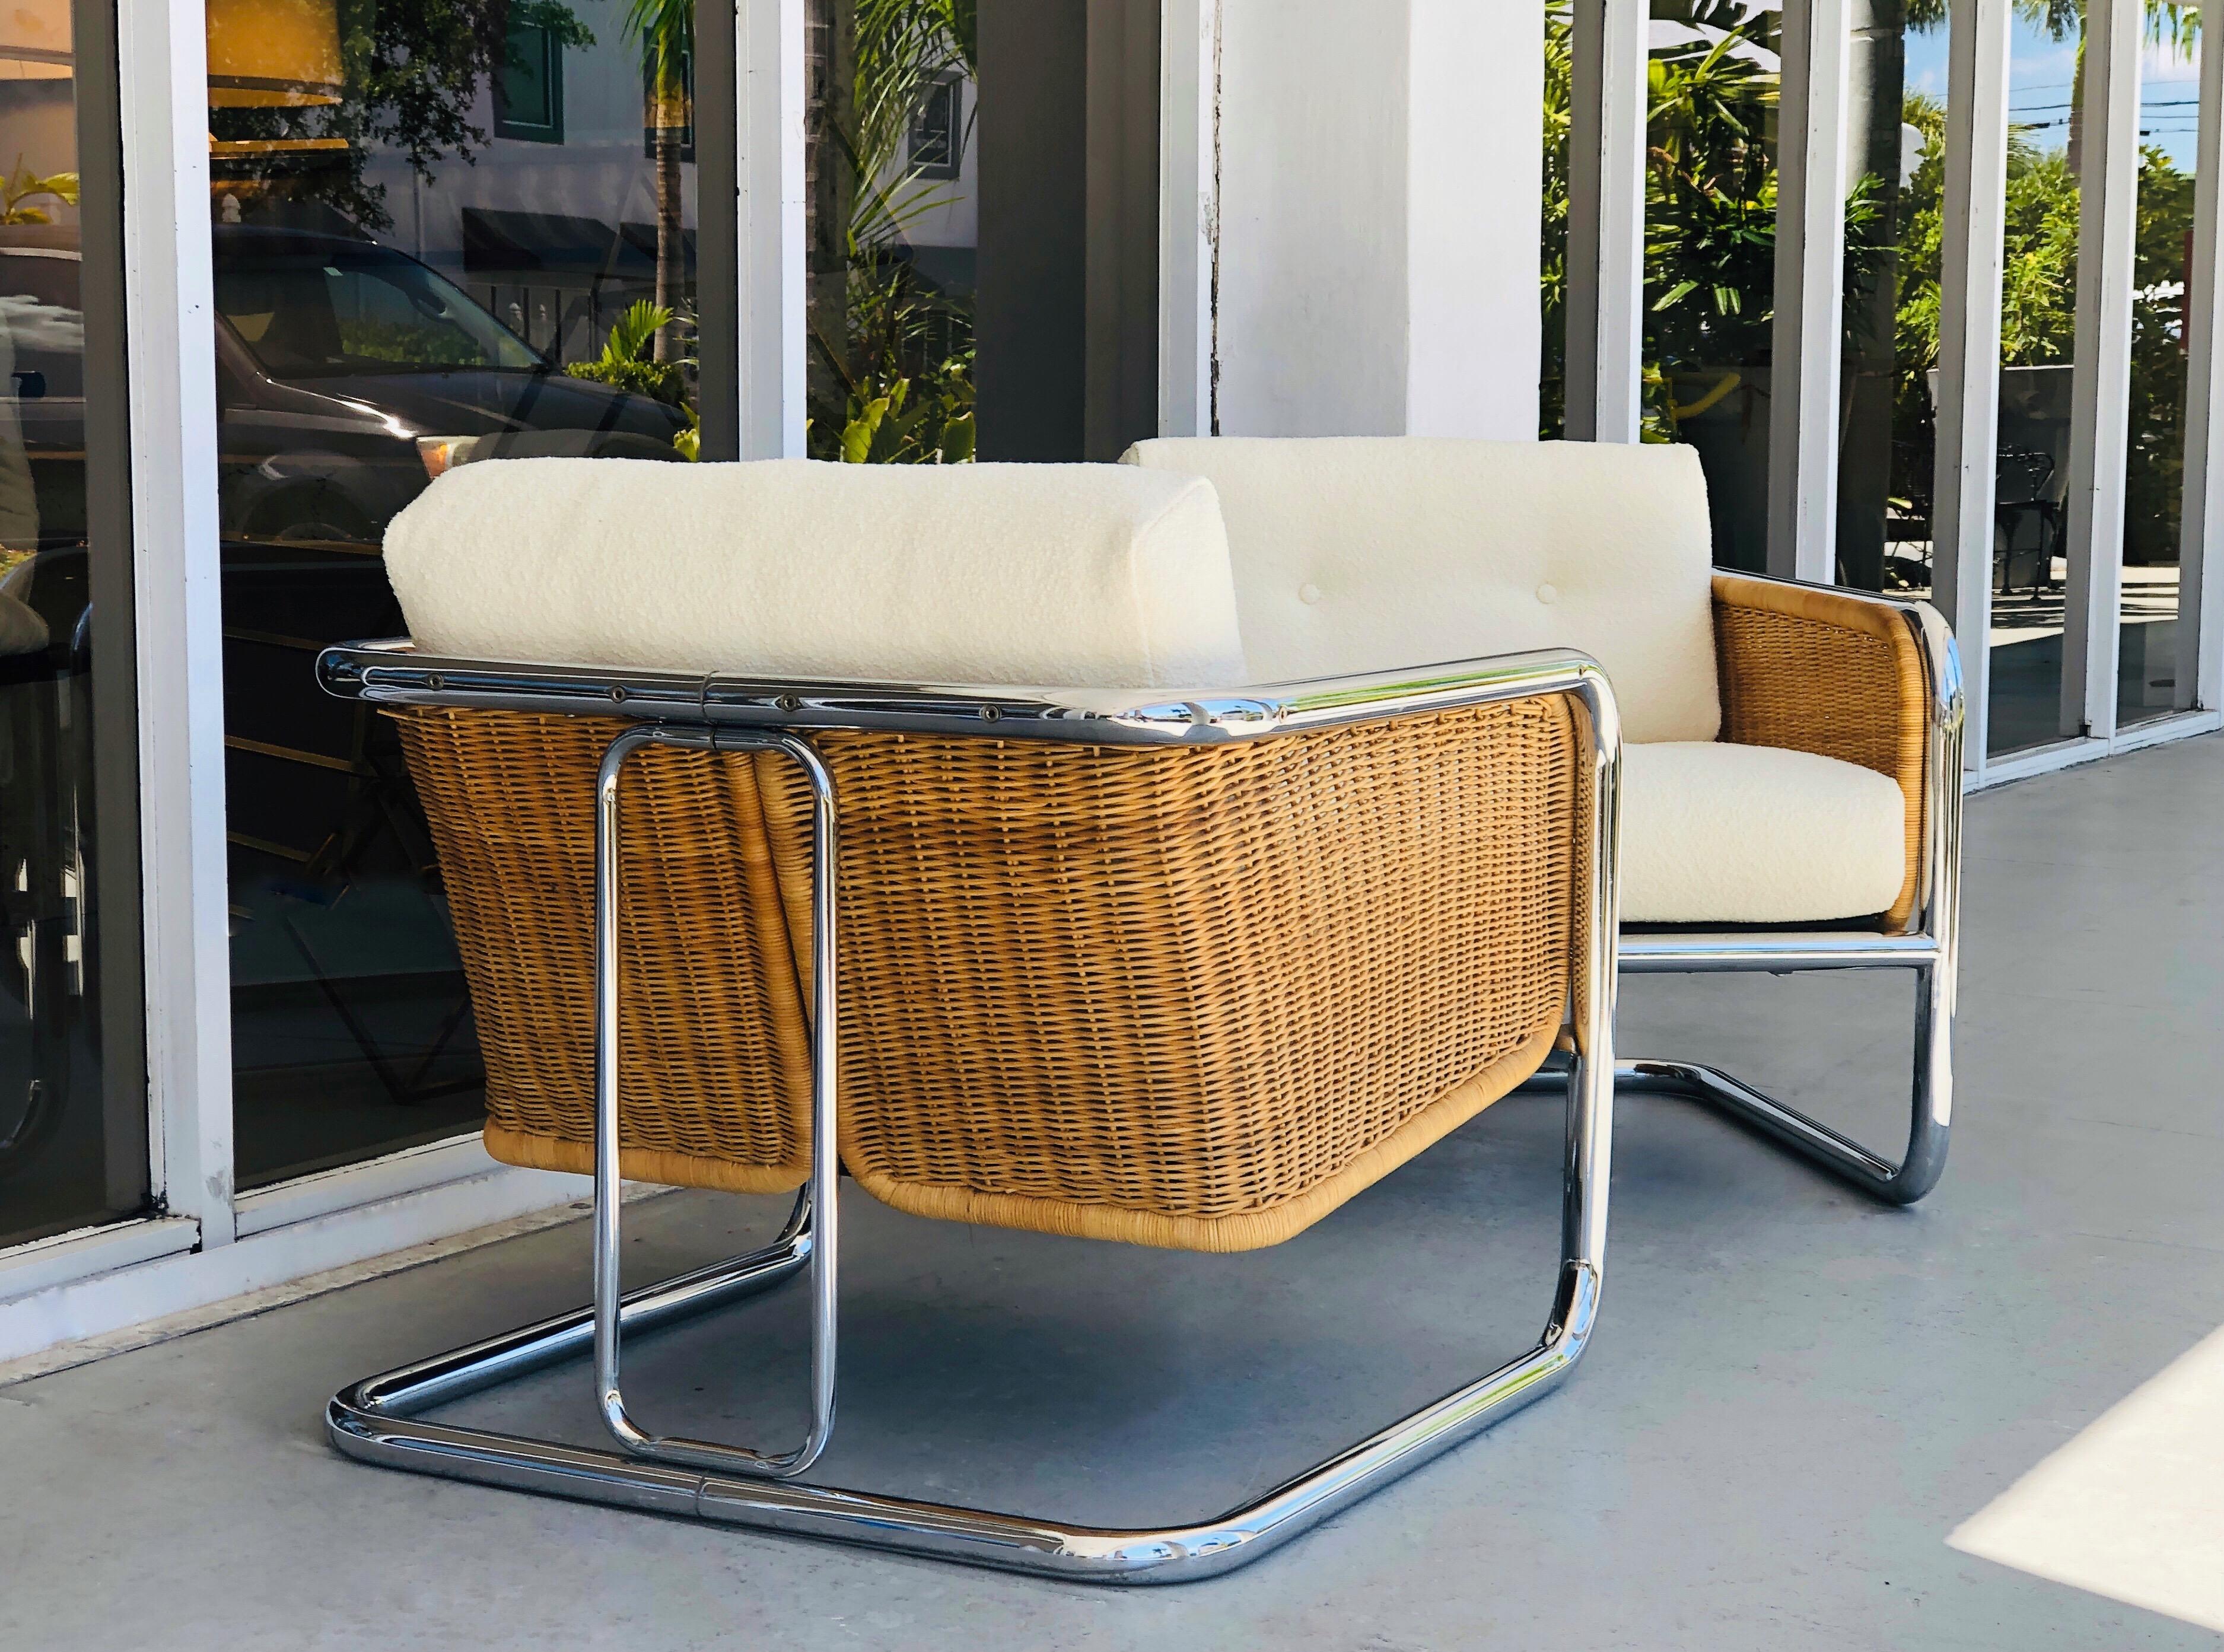 A pair of 1970s lounge chairs by Martin Visser. Chrome and wicker frame. 1970s modernism at its best. The seats and backs are removable. New upholstery.